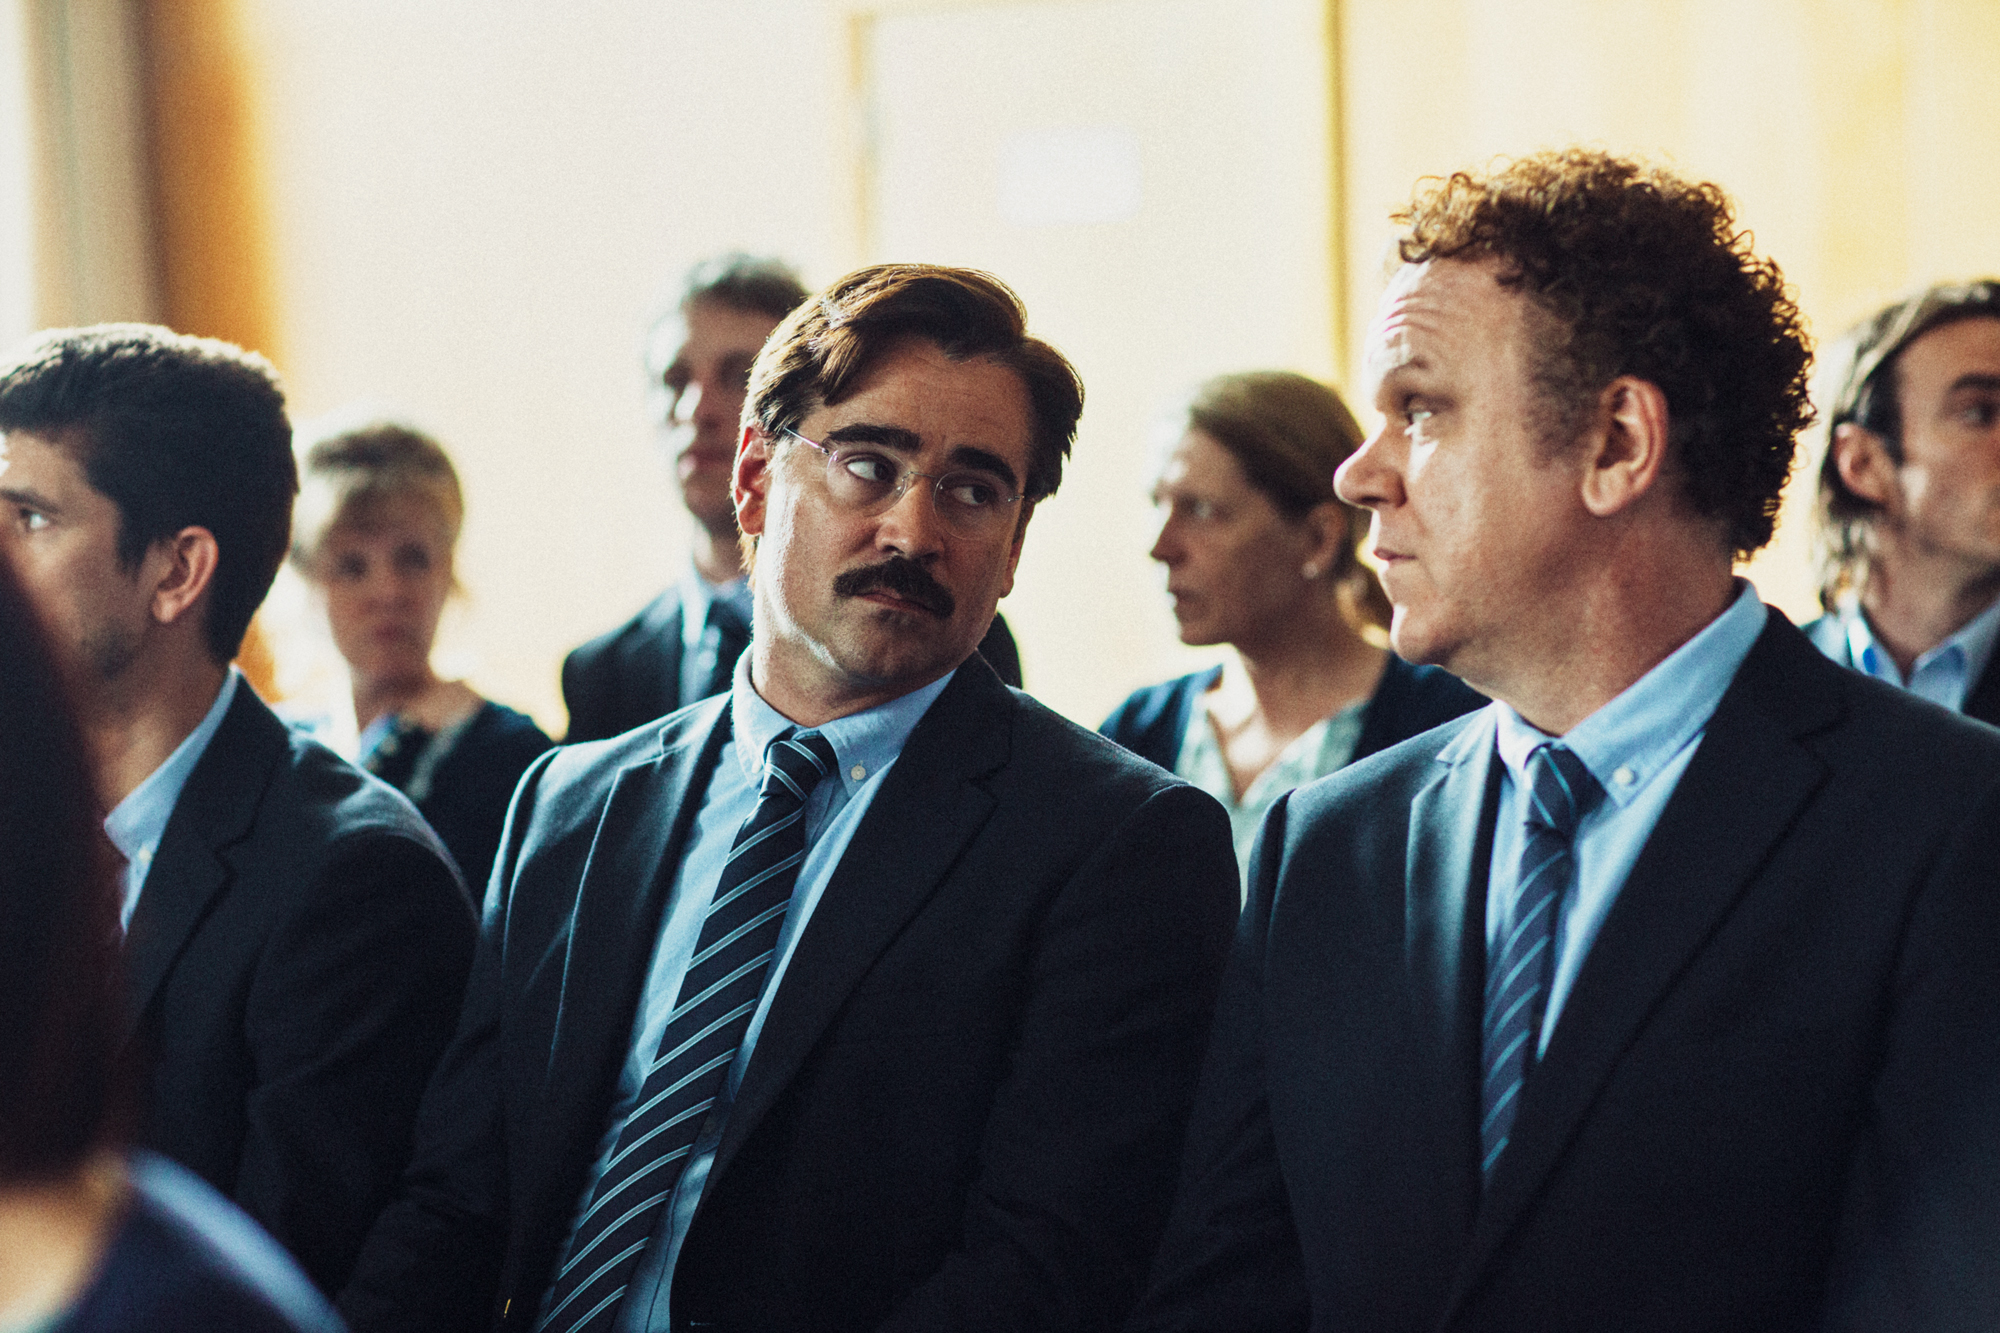 Colin Farrell and John C. Reilly, The Lobster